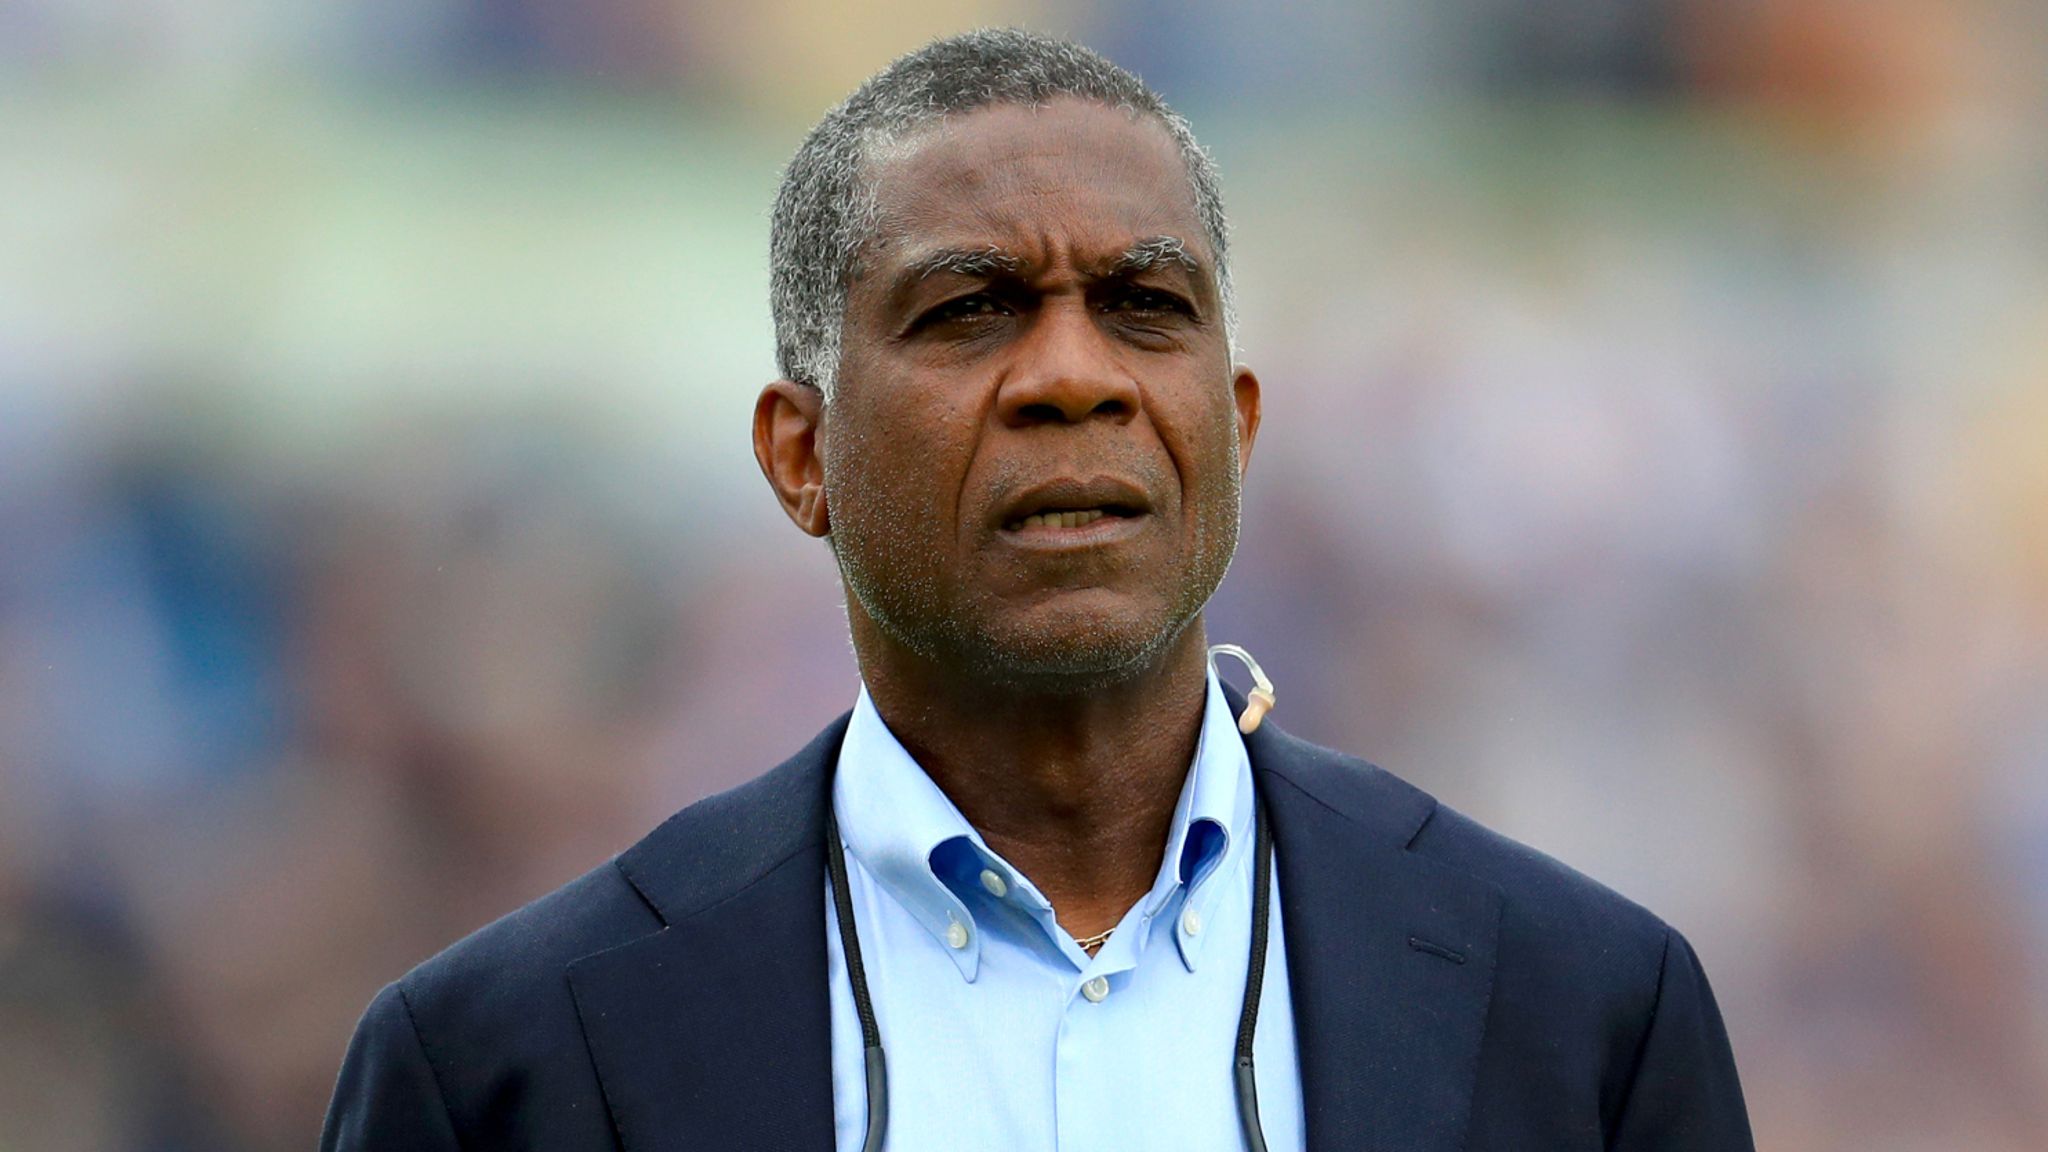 ENG vs IND 2021: “Its Not What You Like, Its What Your Team Needs”: Michael Holding Gutted After Joe Root Does Not Bat At Three